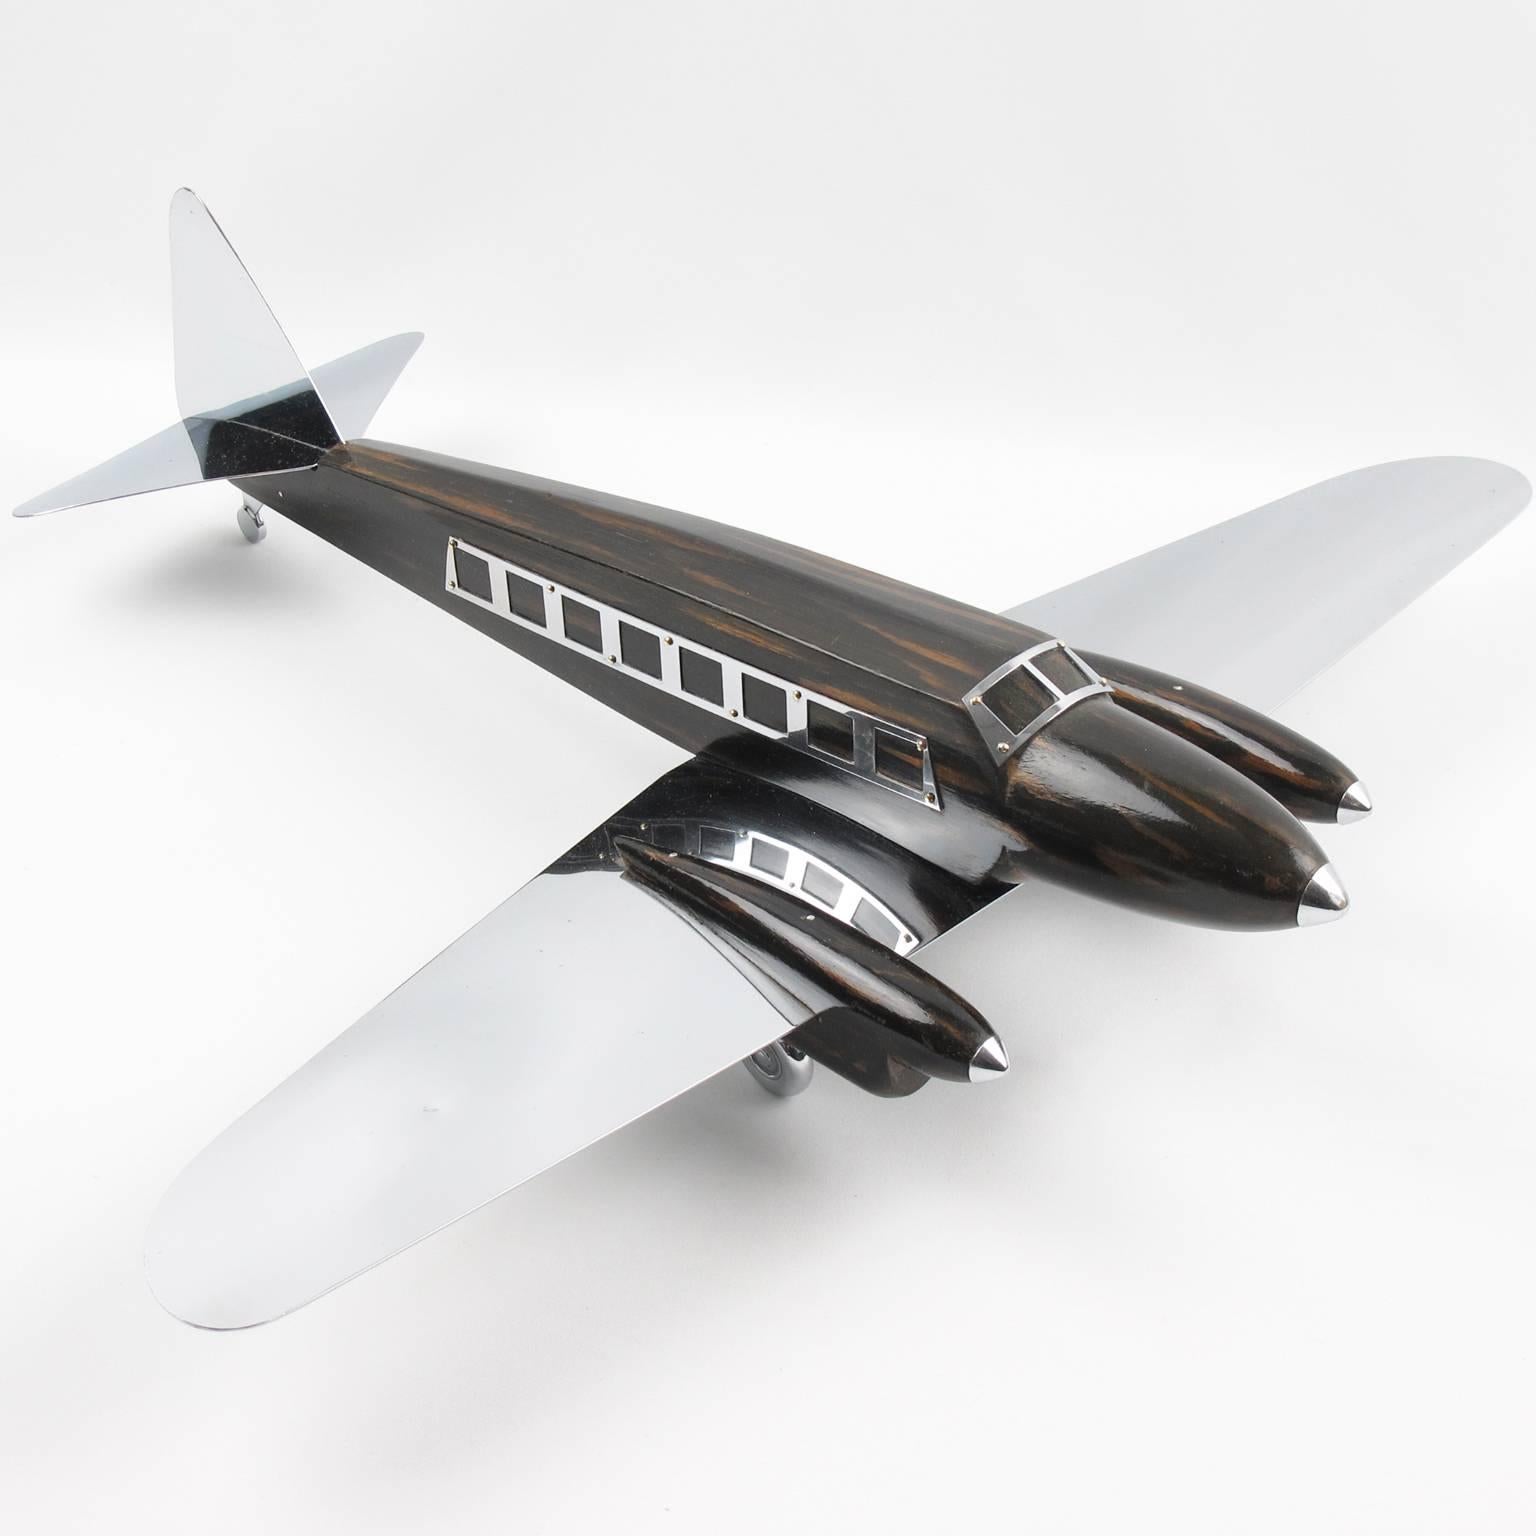 Mid-20th Century Art Deco Wooden and Chrome Airplane Aviation Model